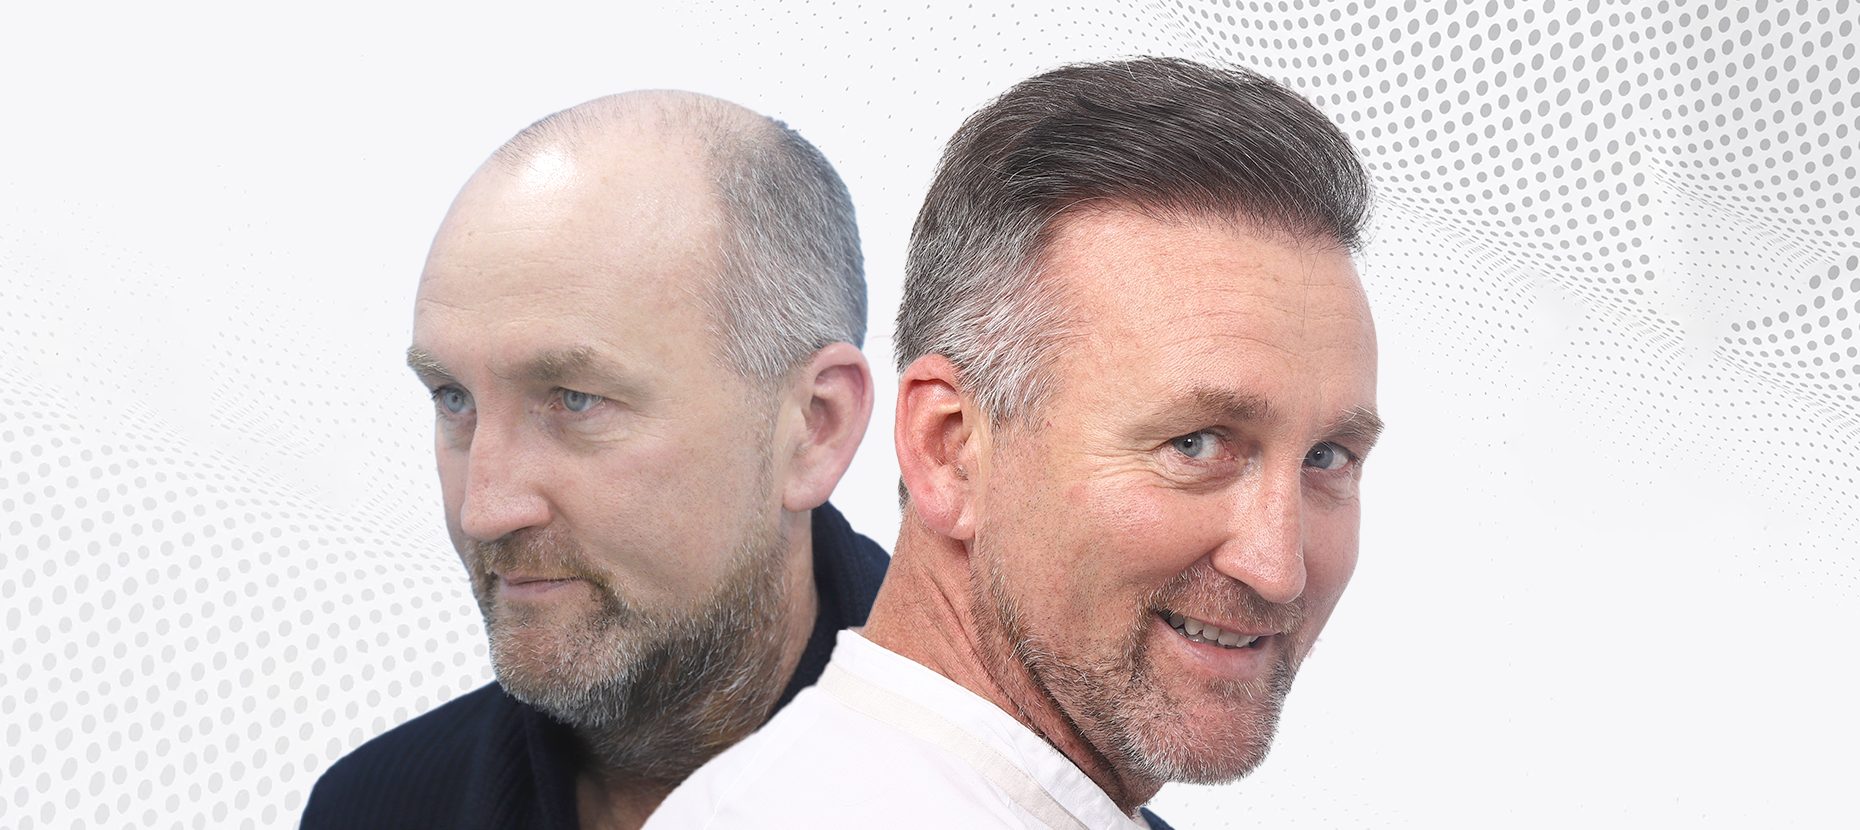 Hair Transplant Before and After: Understanding the Timeline of Results